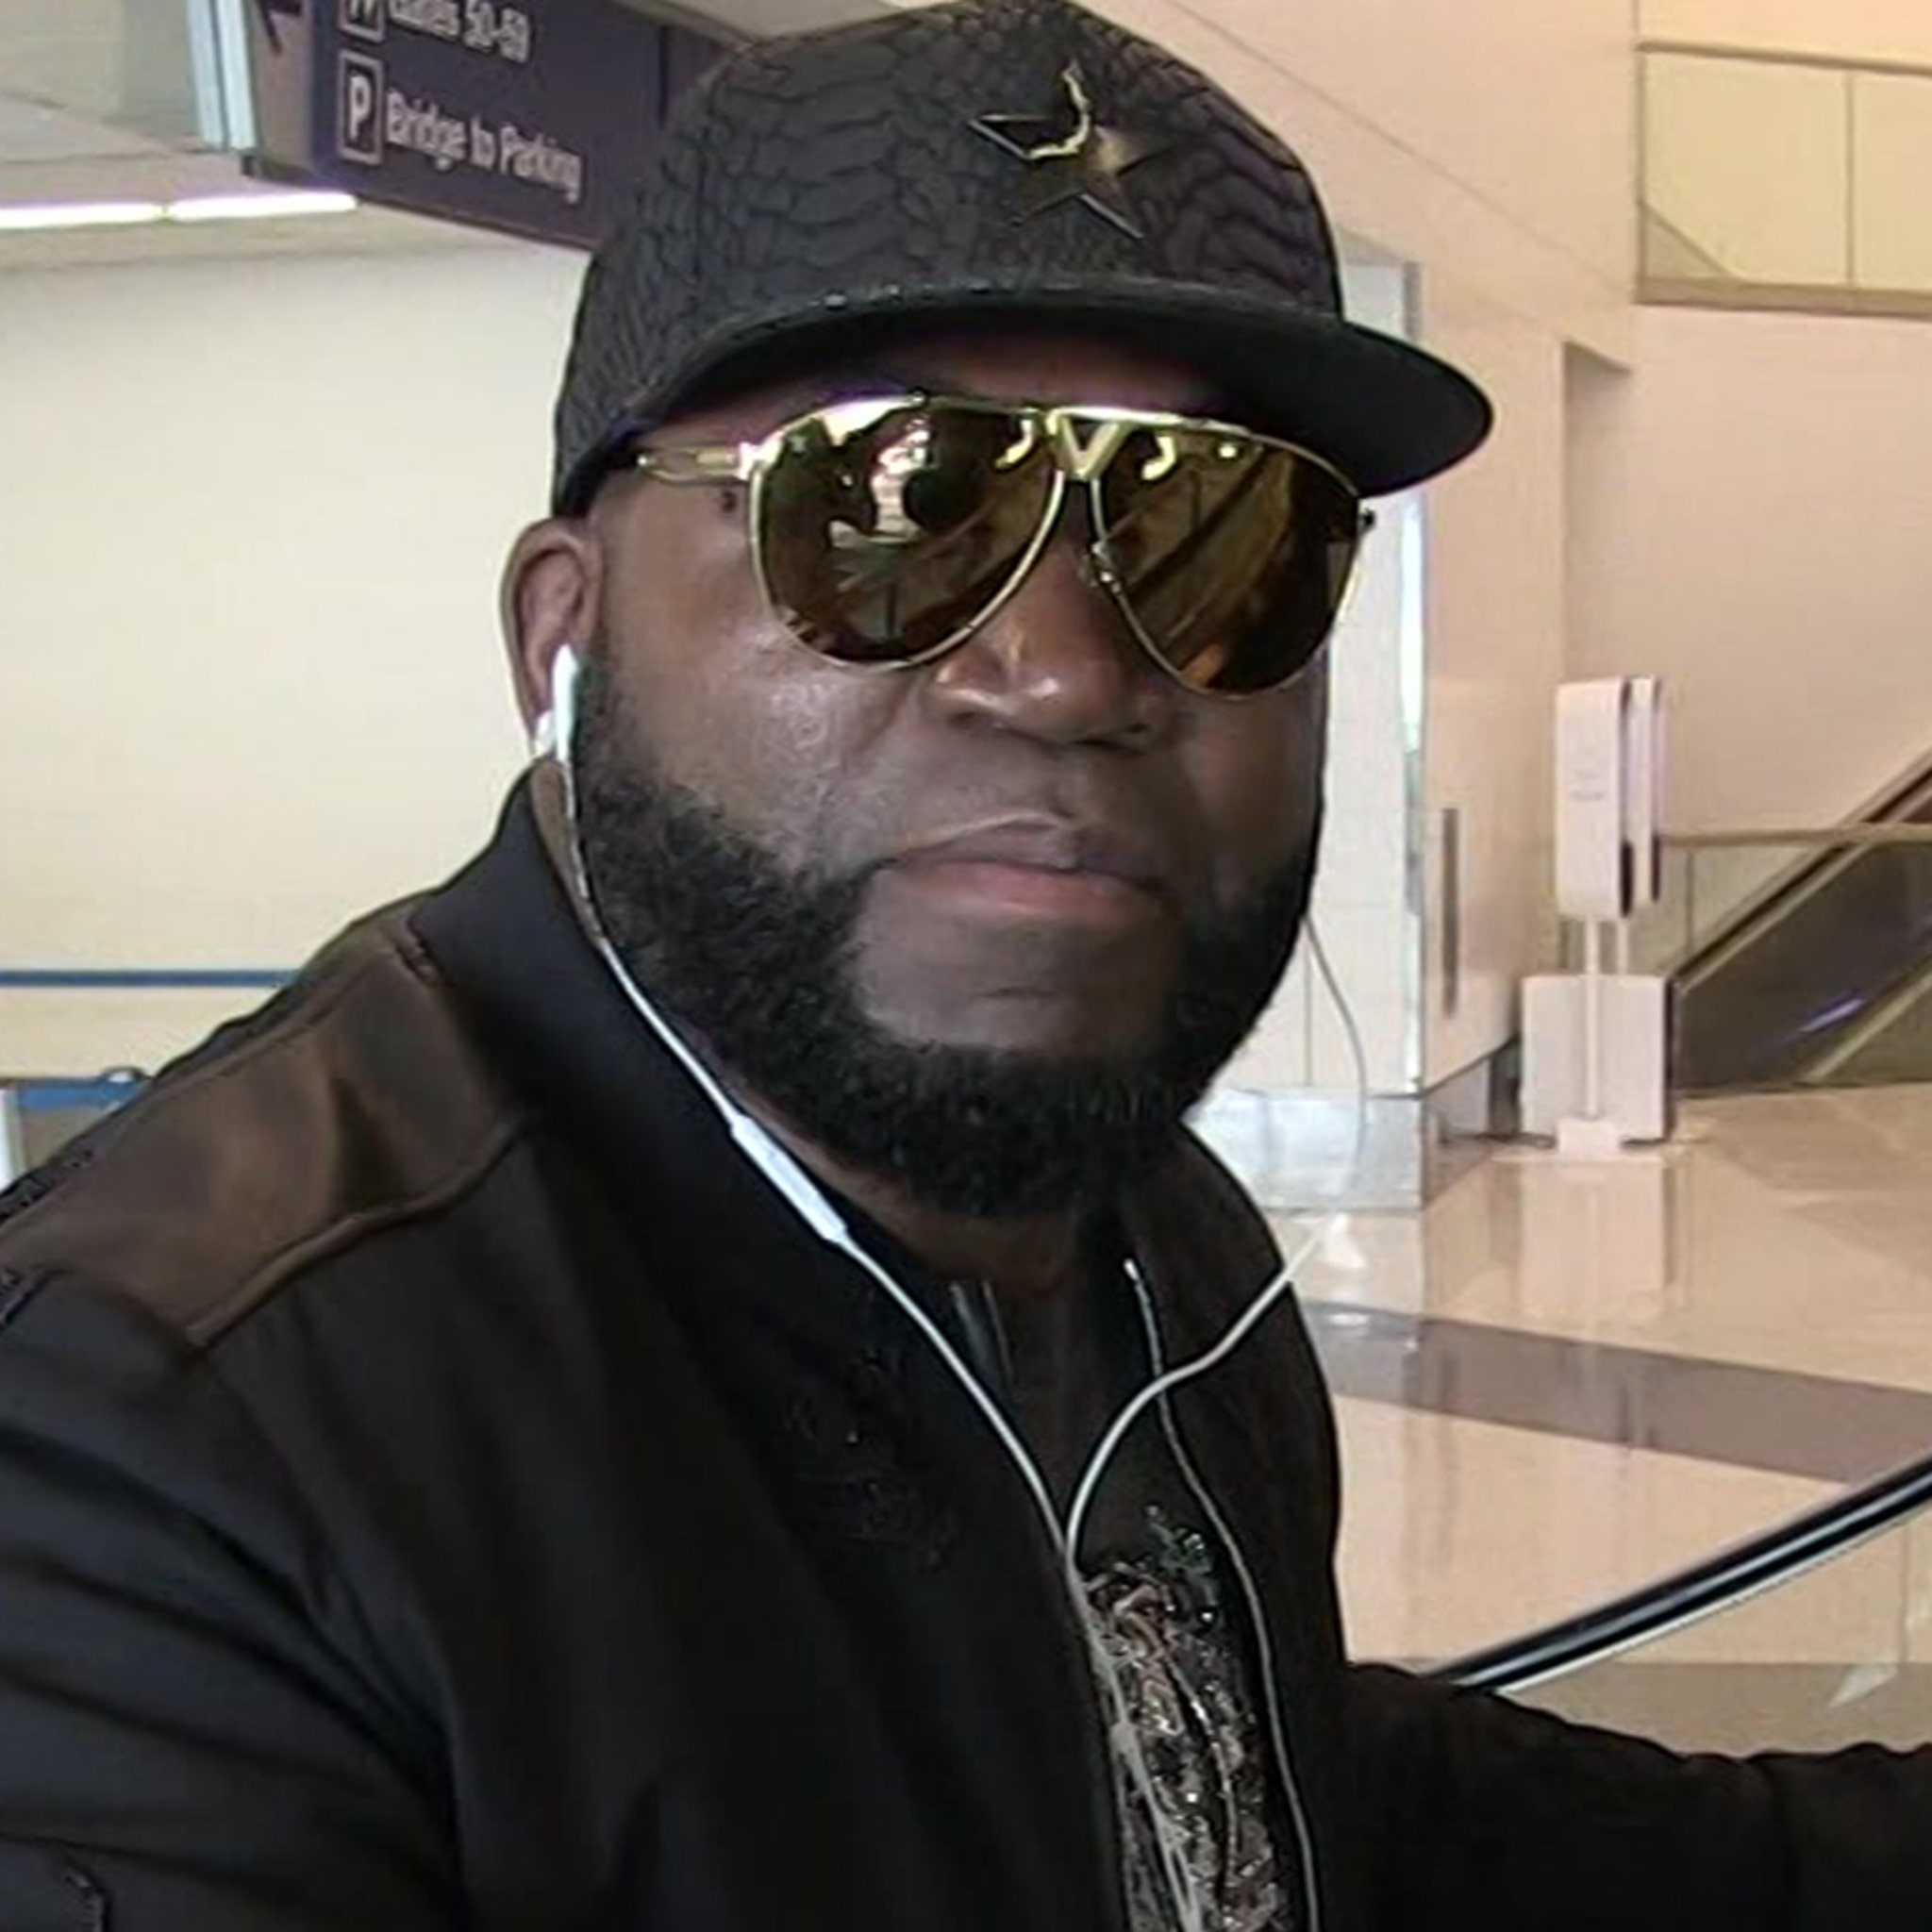 David Ortiz Sits Up And Takes Steps At Hospital, Wife Says